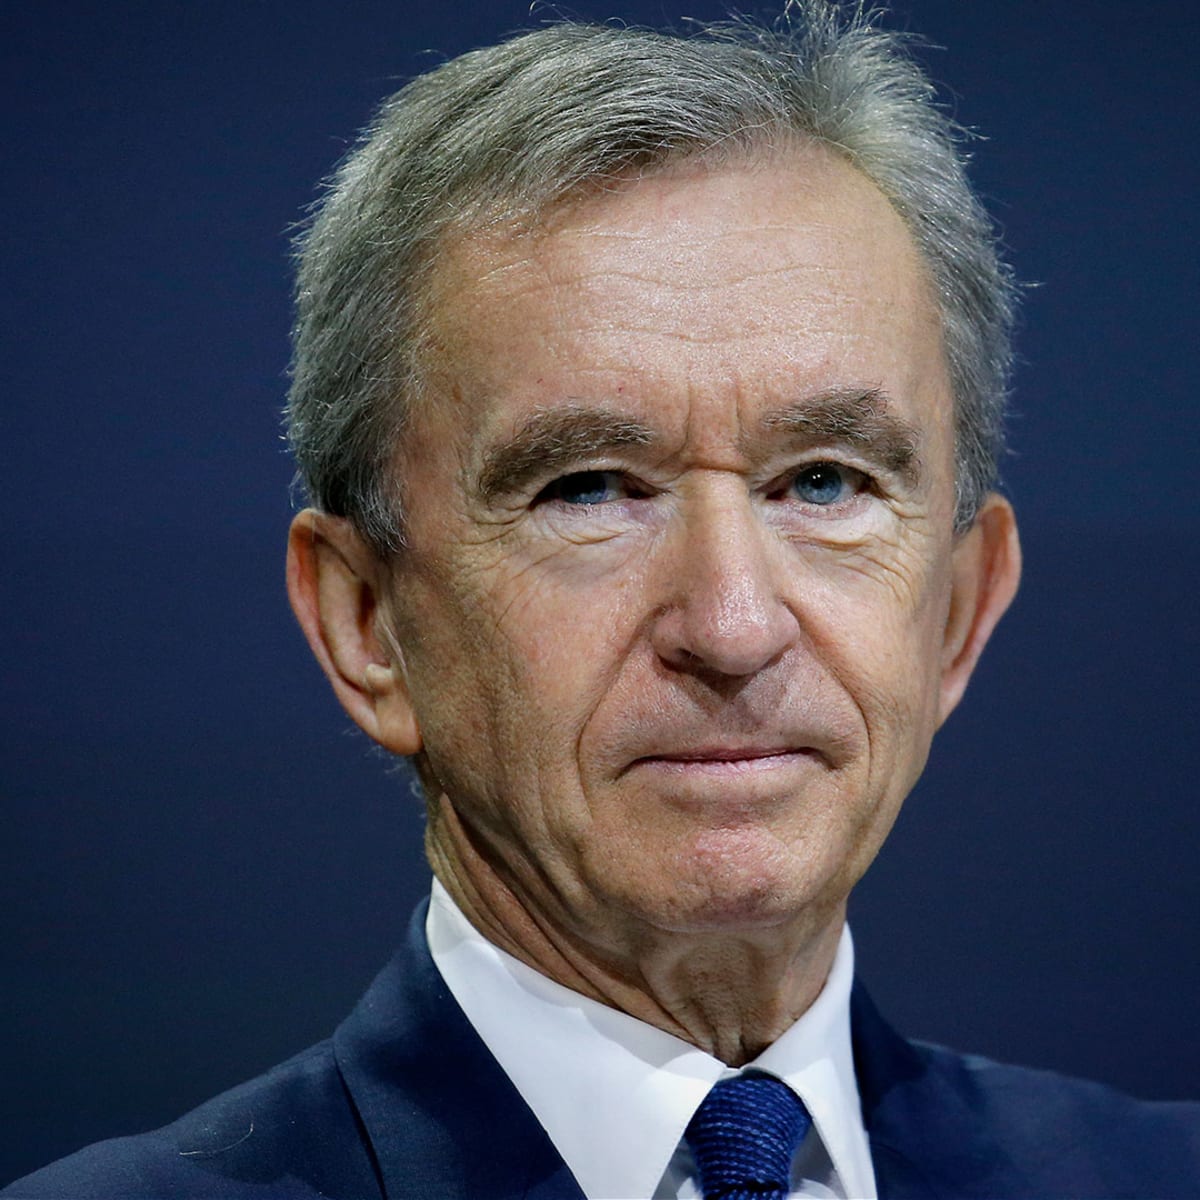 Bernard Arnault: The richest man in the world knows all about luxury